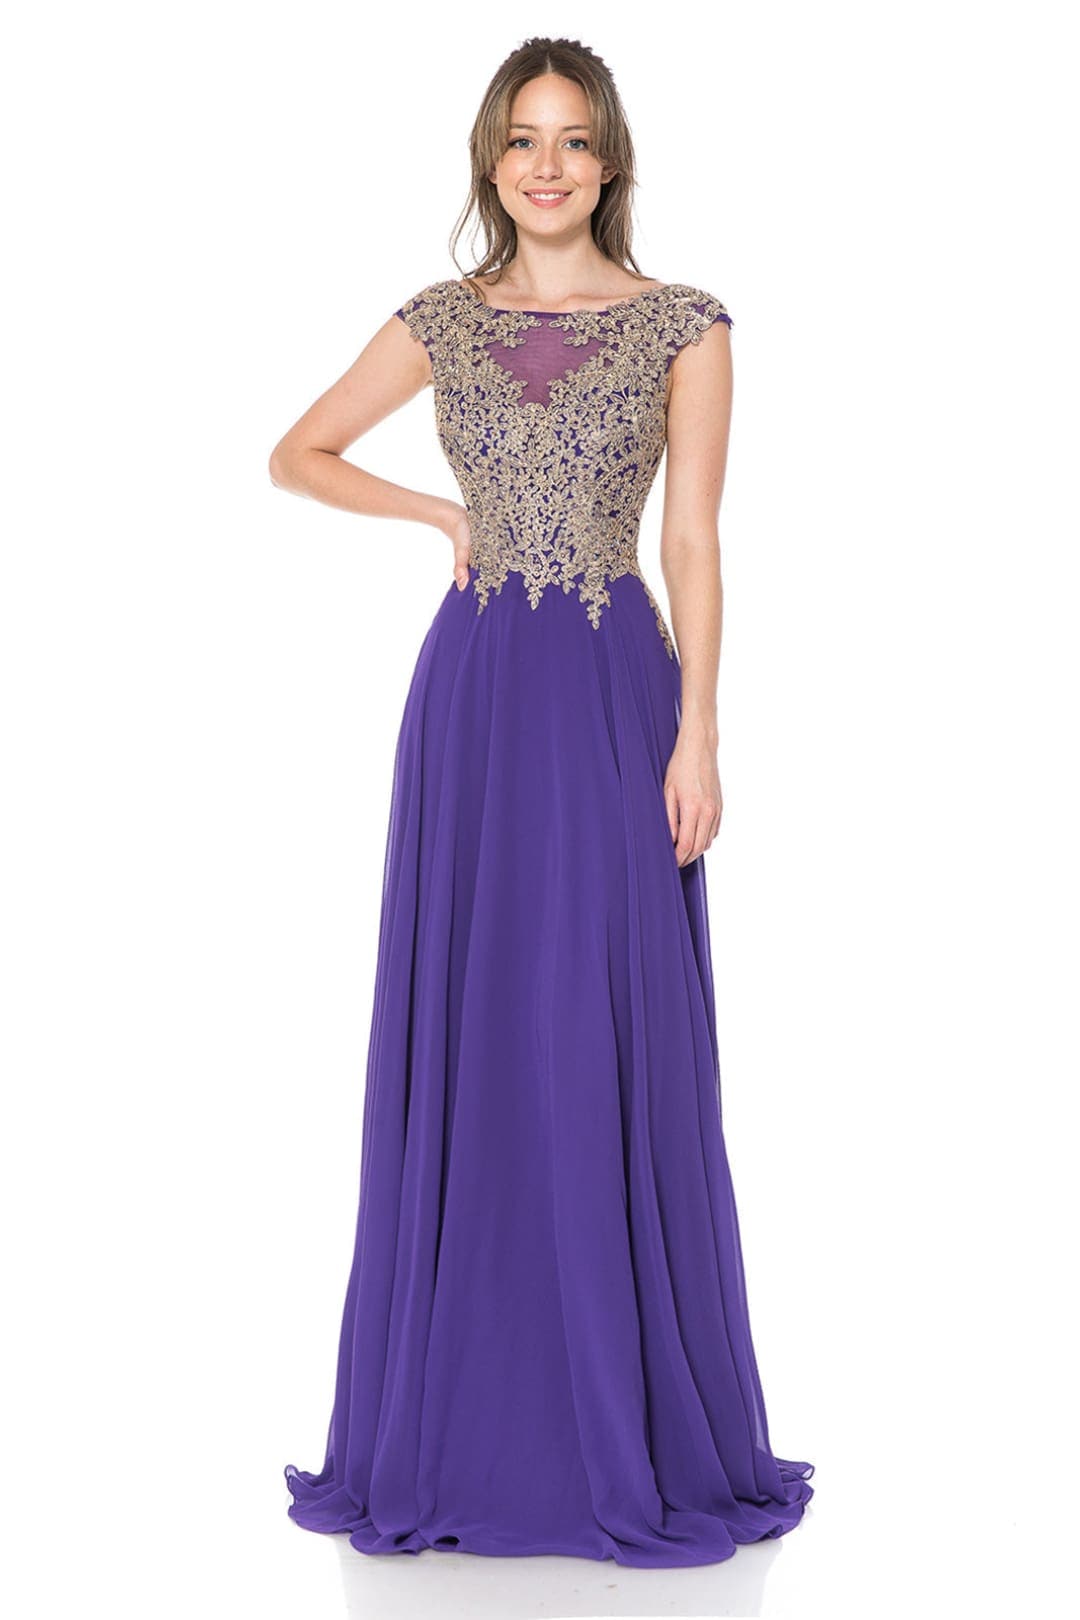 Classy Special Occasion Gown - PURPLE / XS